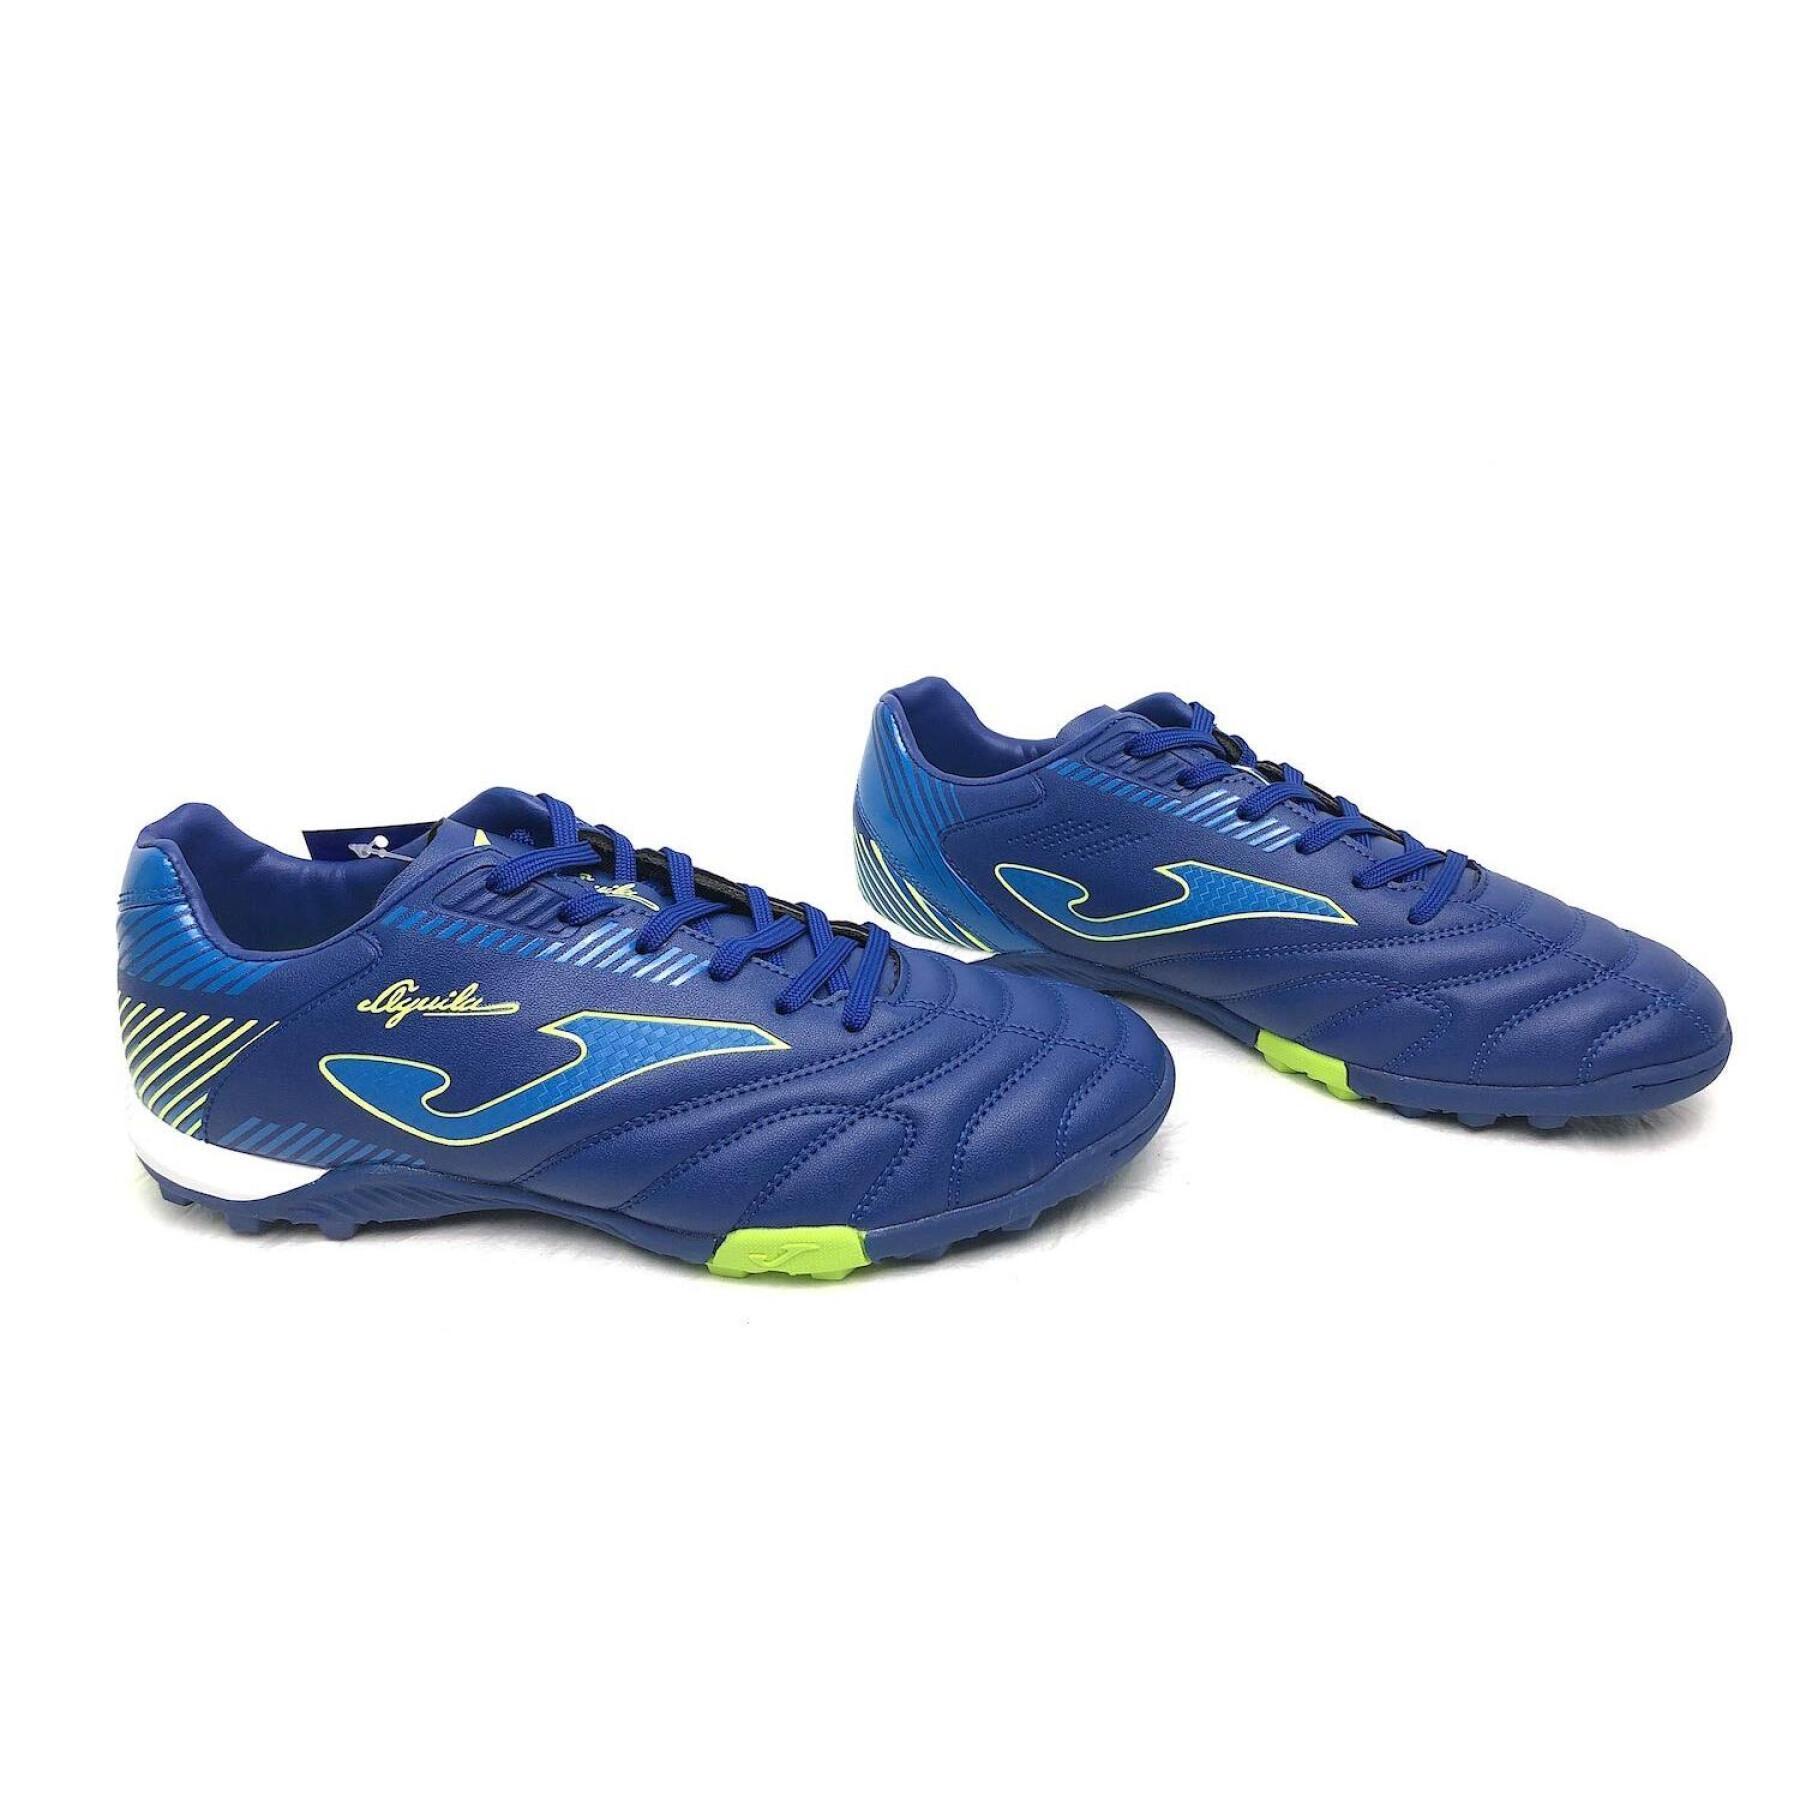 Chaussures Joma Aguila Turf 2032